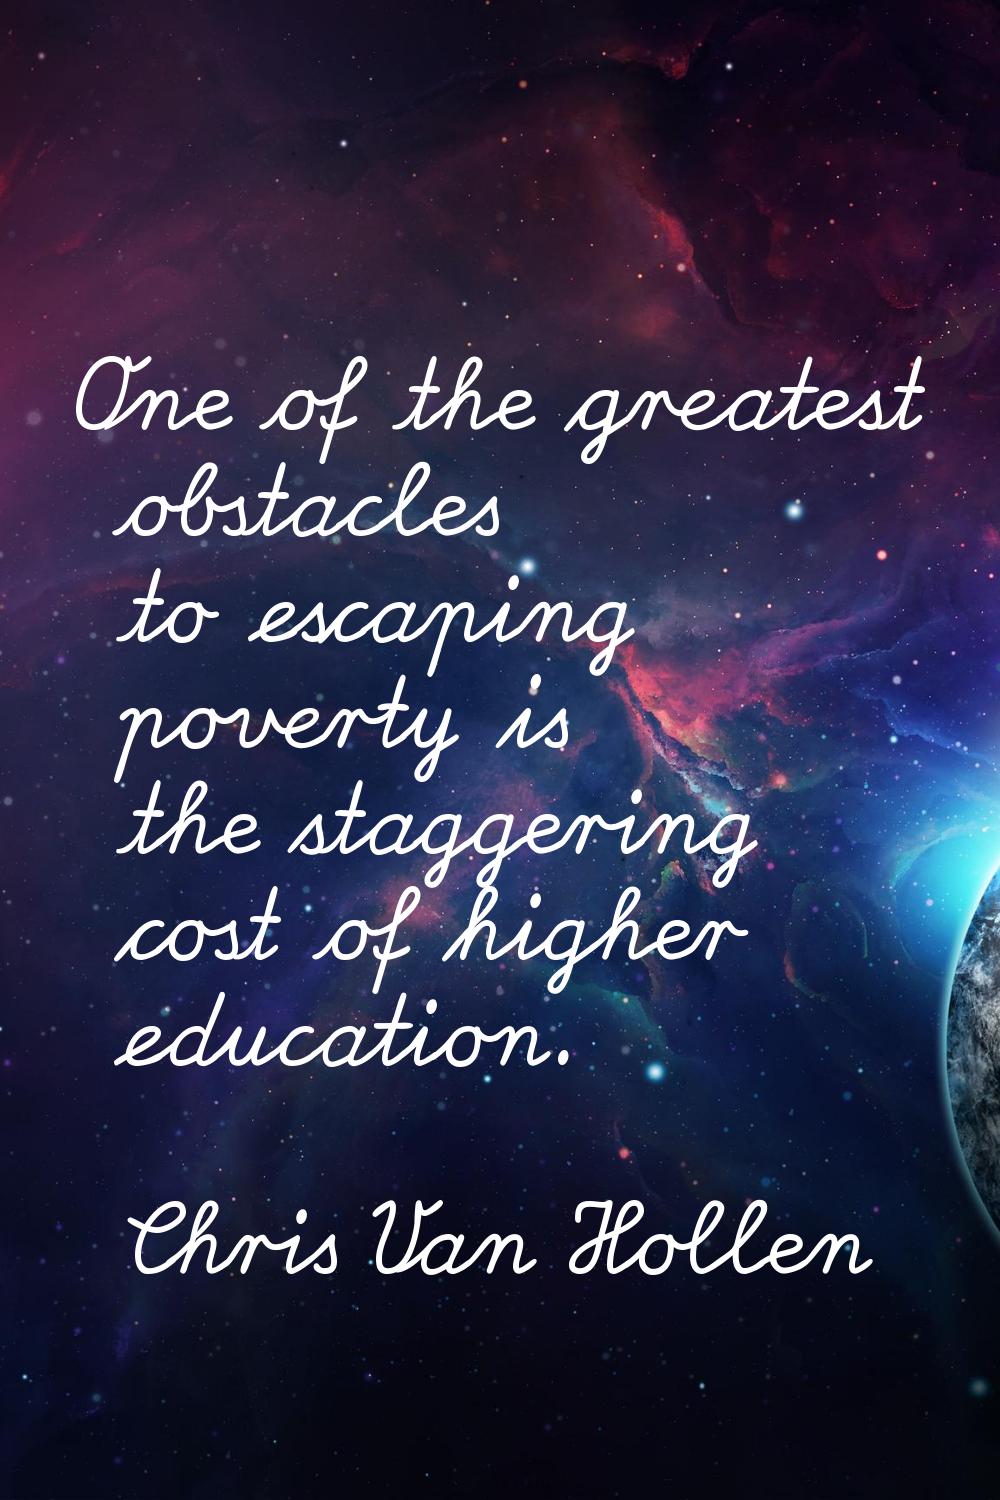 One of the greatest obstacles to escaping poverty is the staggering cost of higher education.